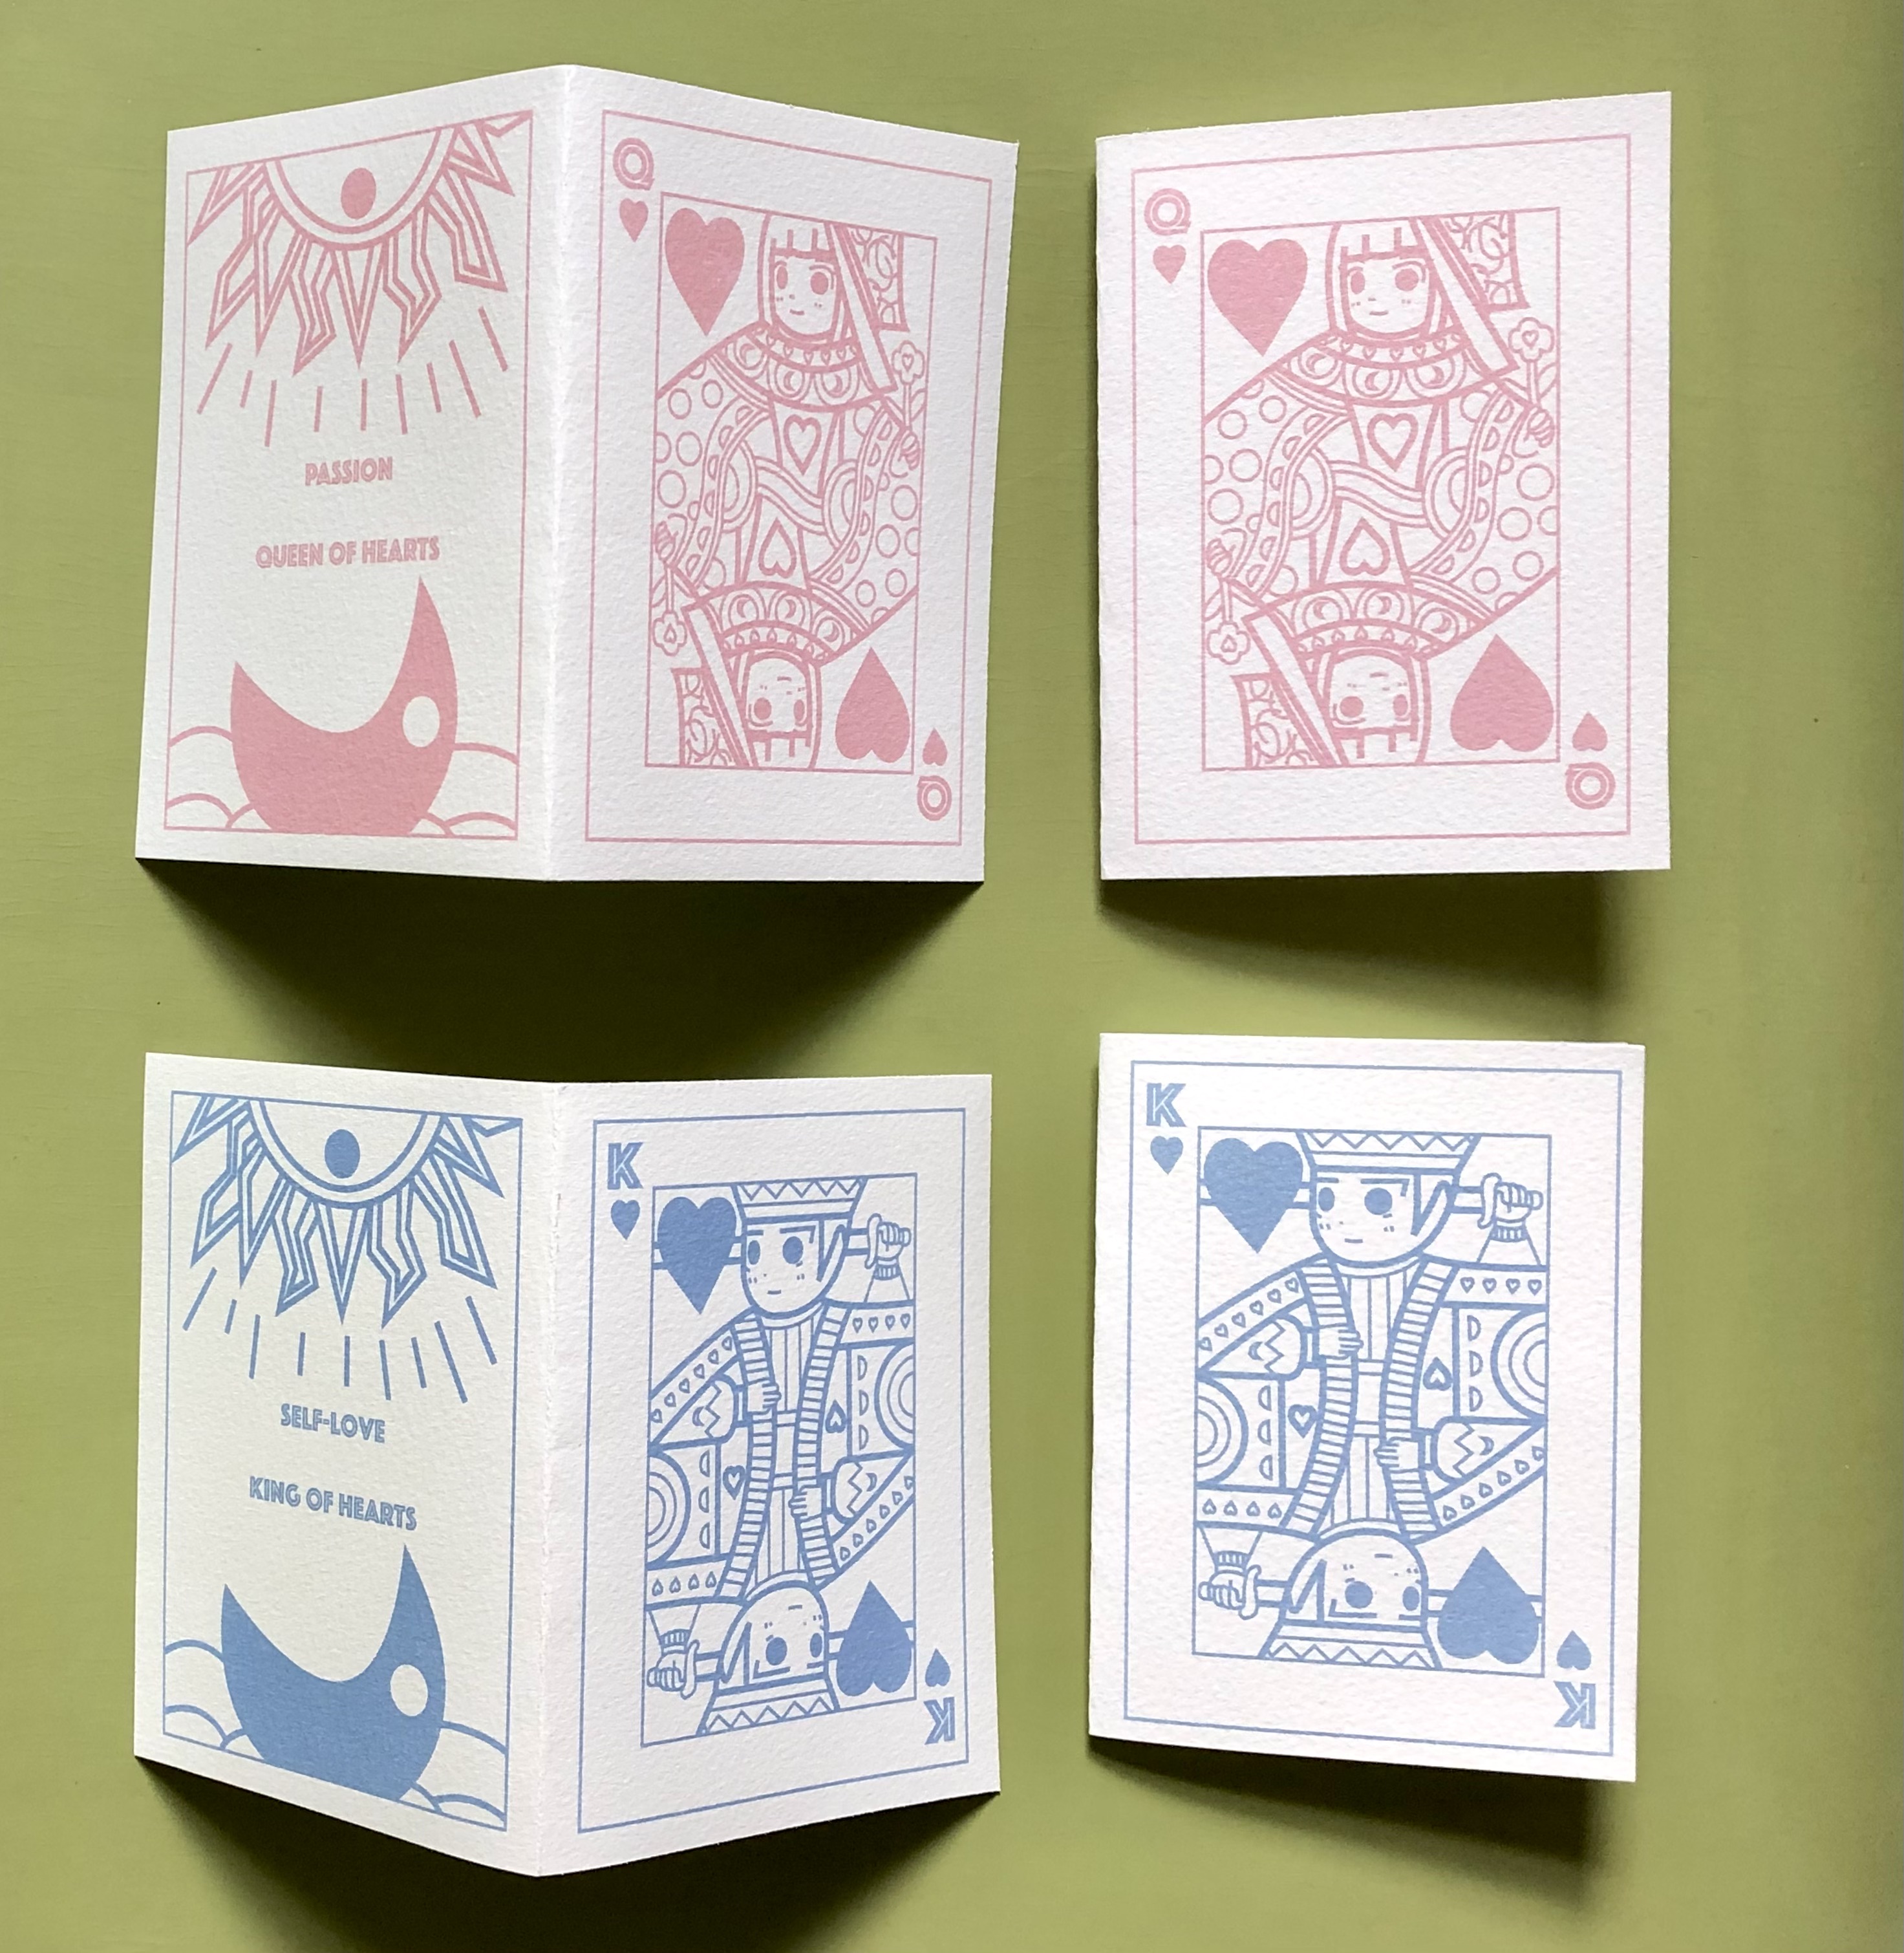 Greeting card designs by Pui Ki Tse. Pale blue and red coloured designs on white card. Design reminiscent of playing cards.